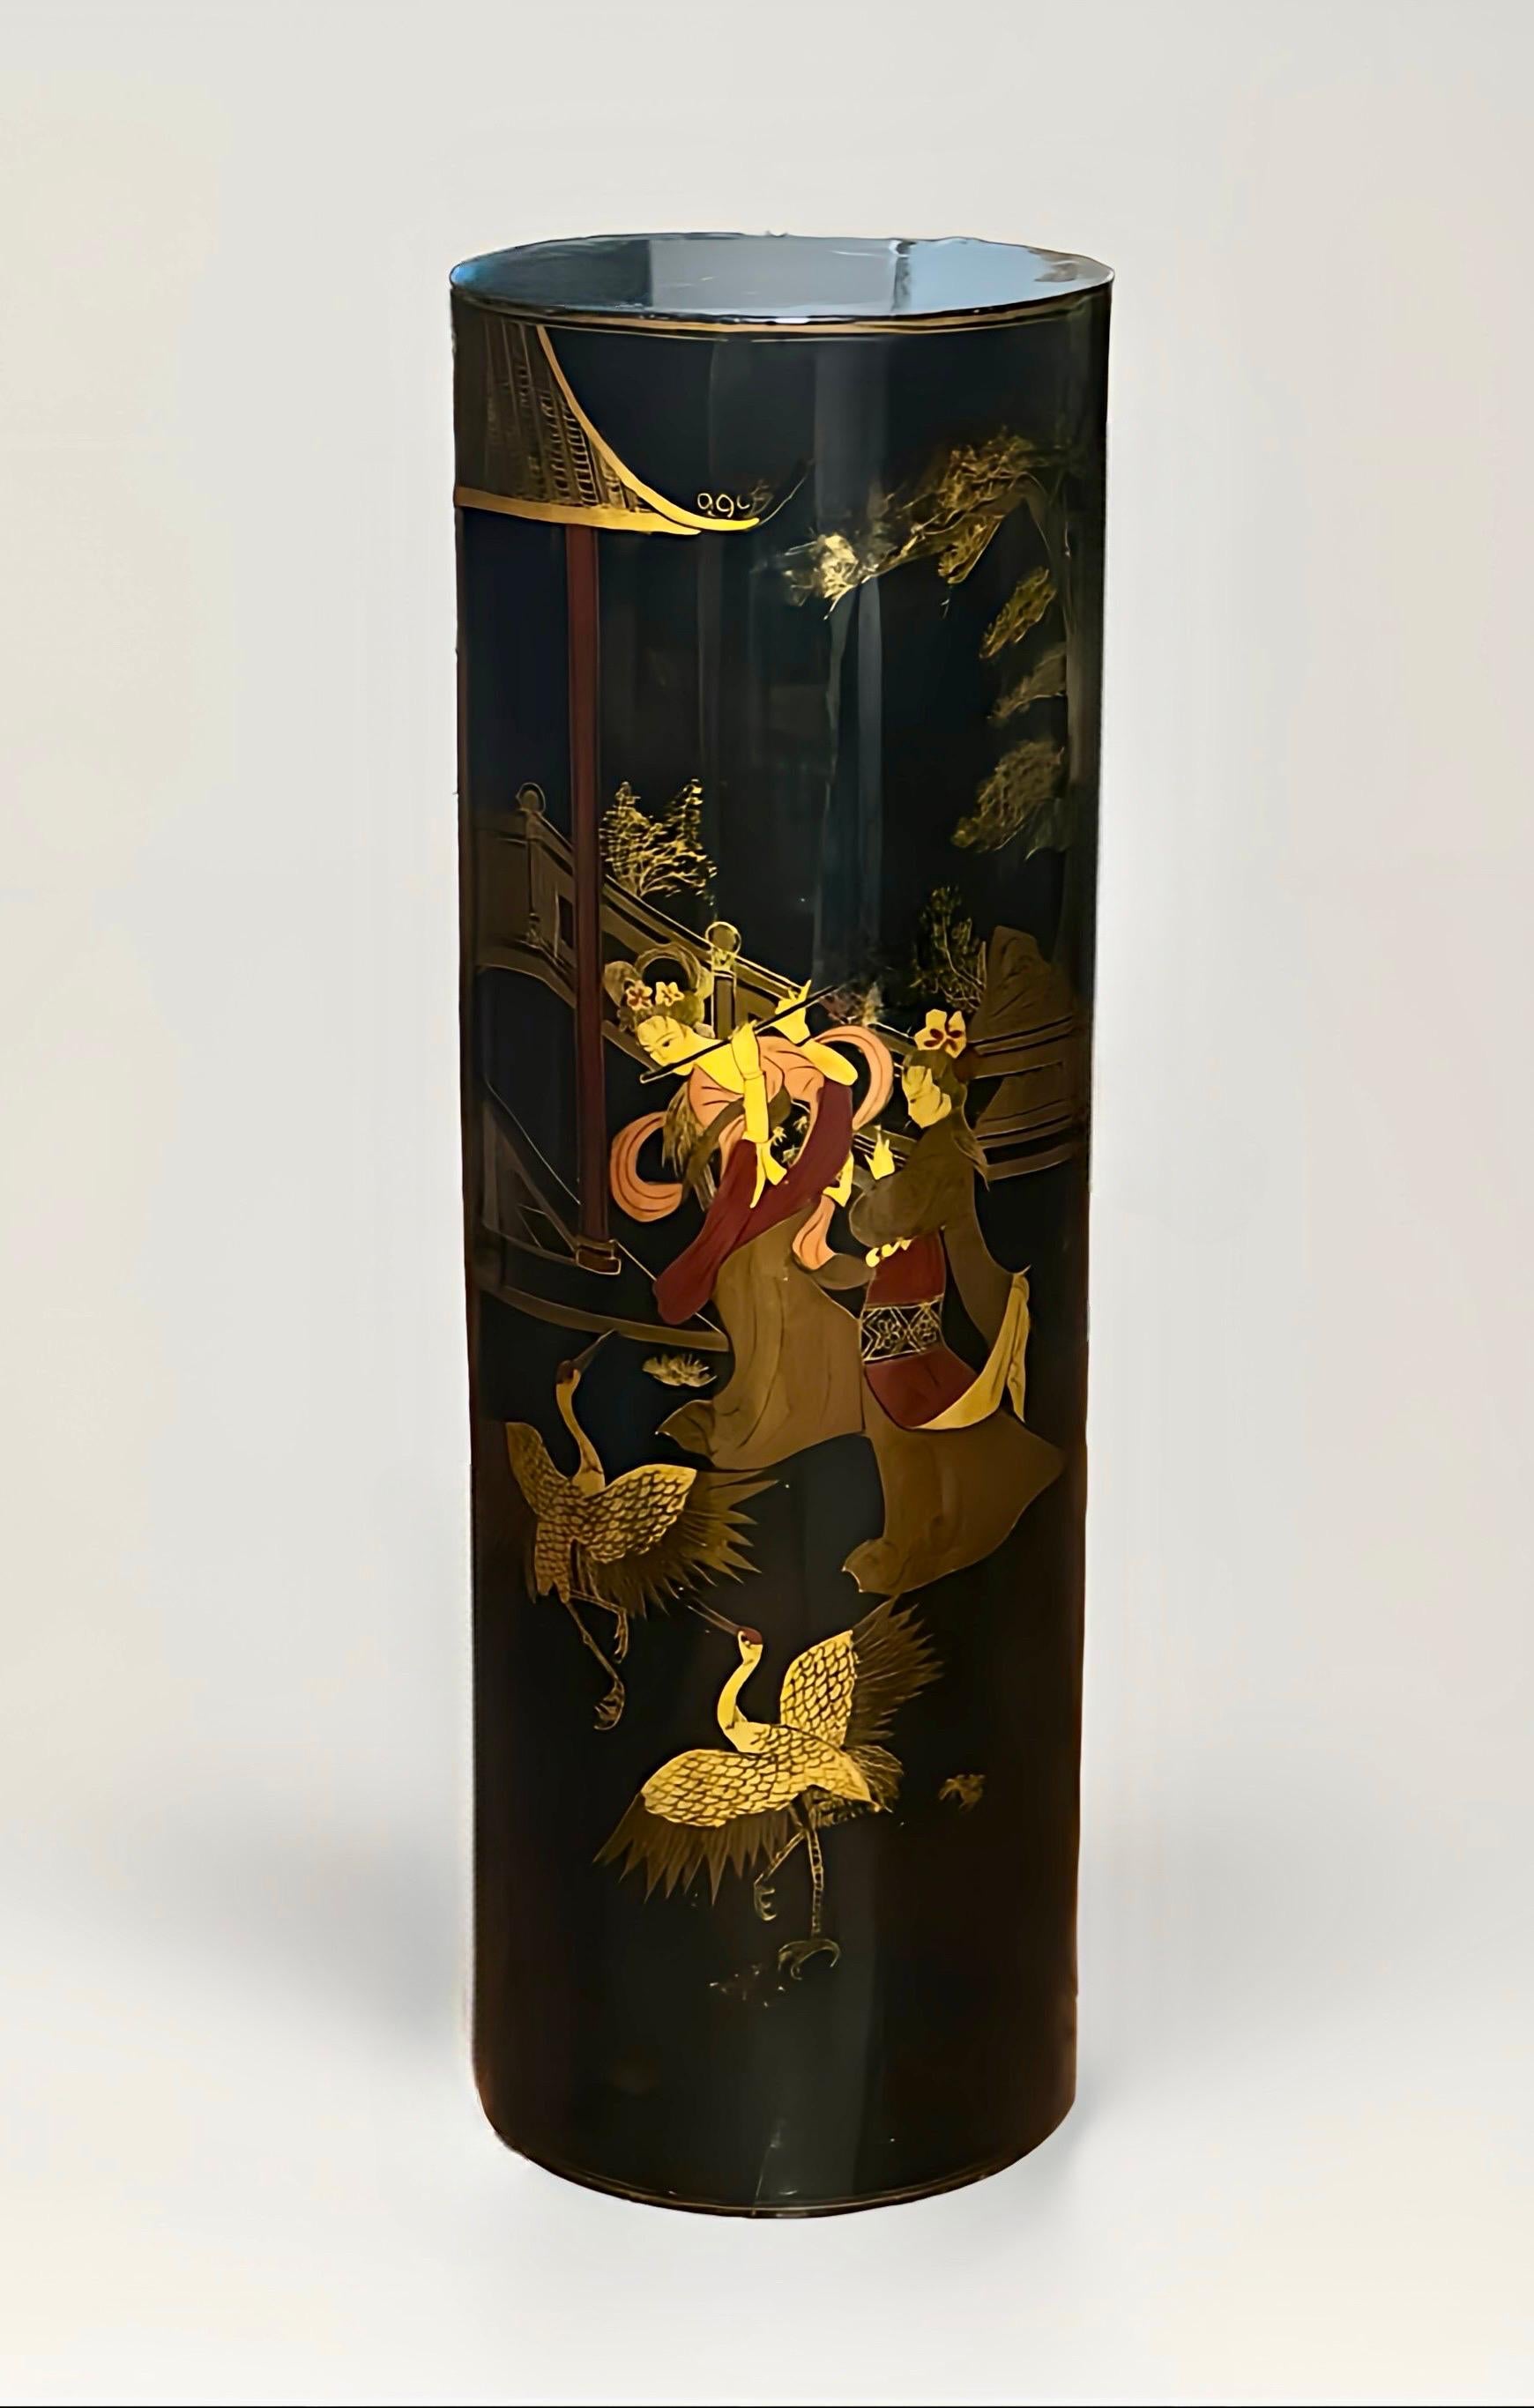 Chinese black lacquered cylindrical wood pedestal, 1960s.

Exquisite pedestal with a scene depicting elegant ladies in a pavilion garden with birds, architecture and trees. A picturesque work with beautiful colors against the black background. It is